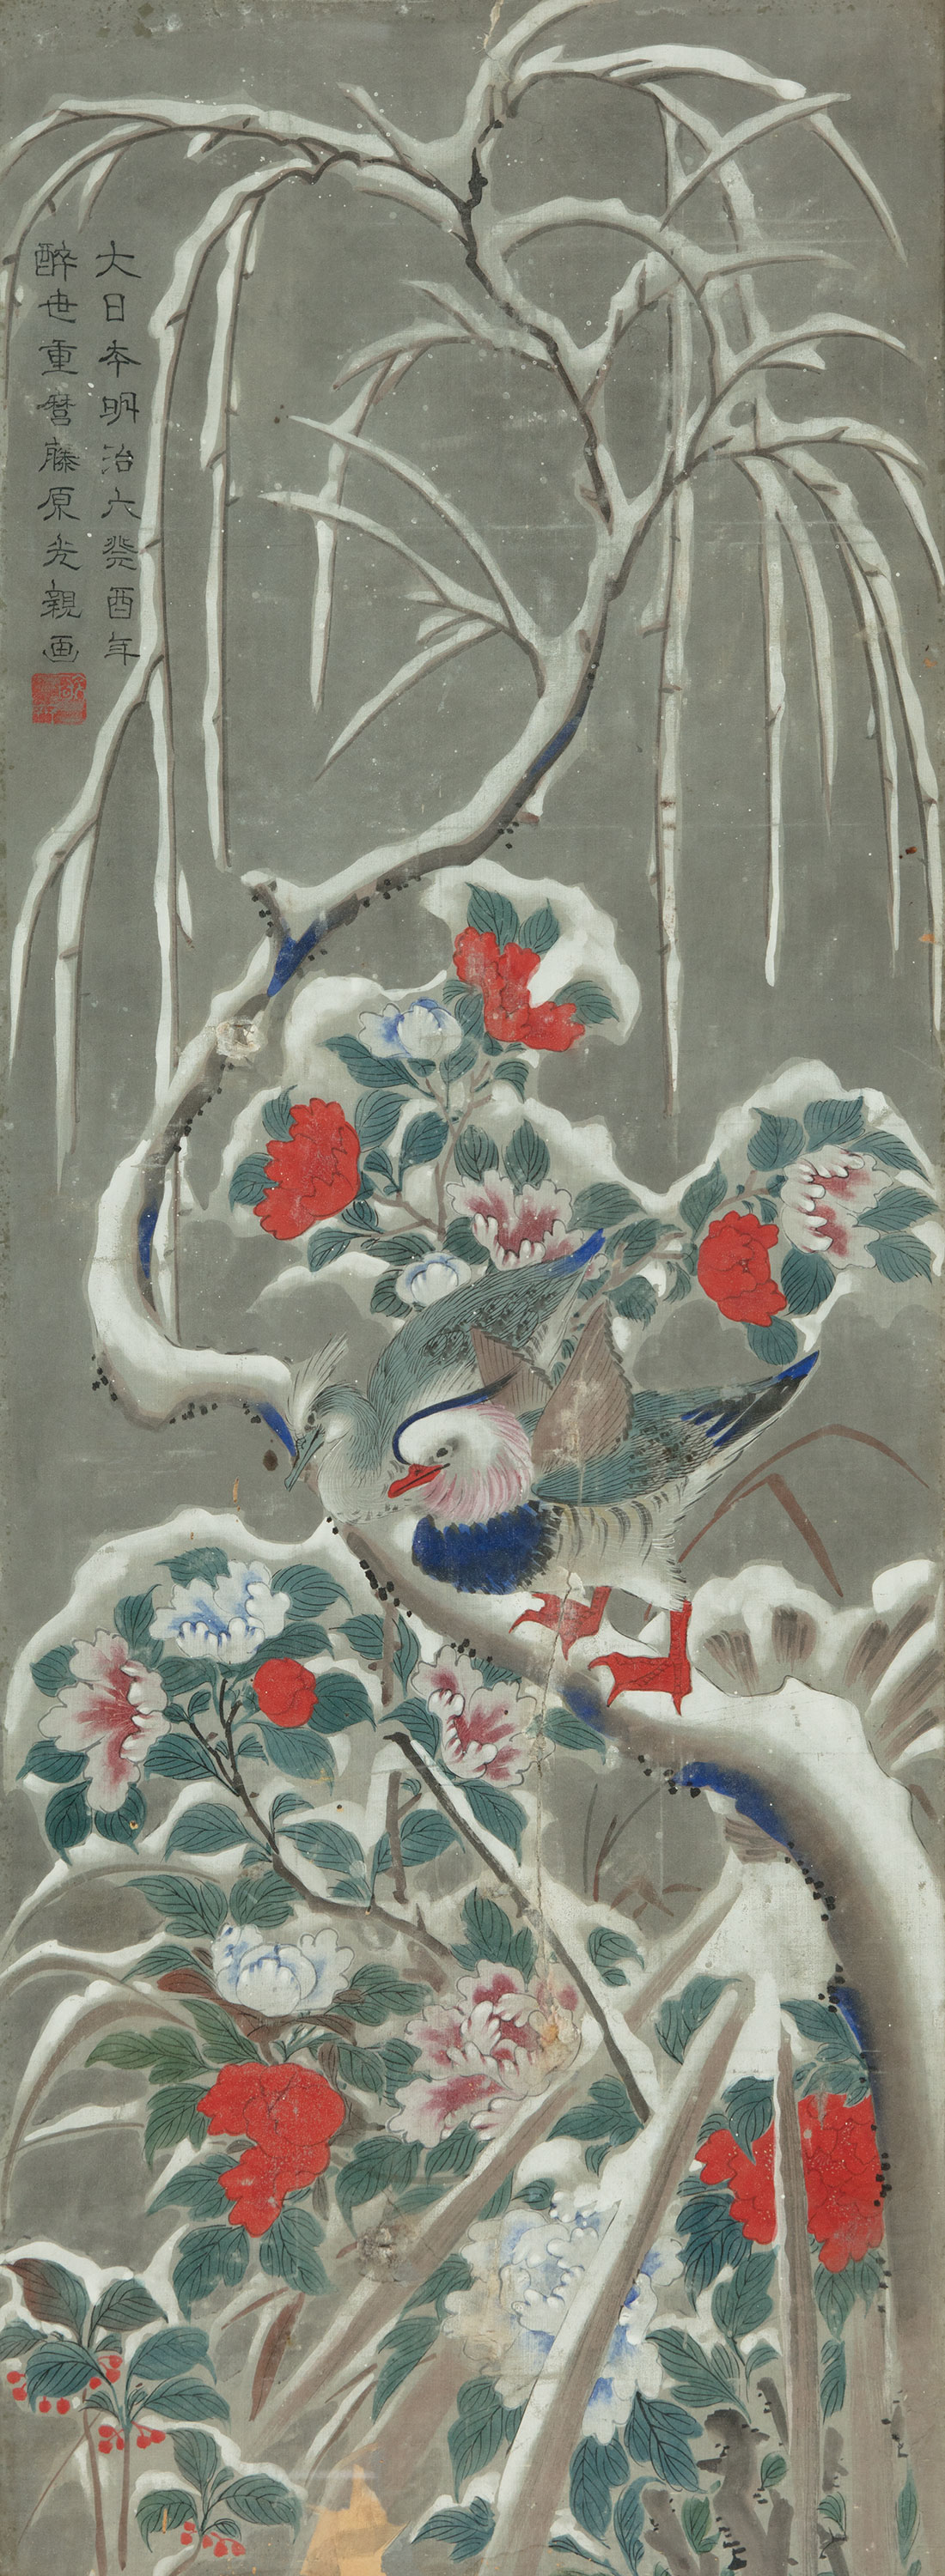 Japanese School, Meiji Period (1868-1912), "Birds and Flowers of the Four Seasons", 4 paintings, - Image 2 of 4